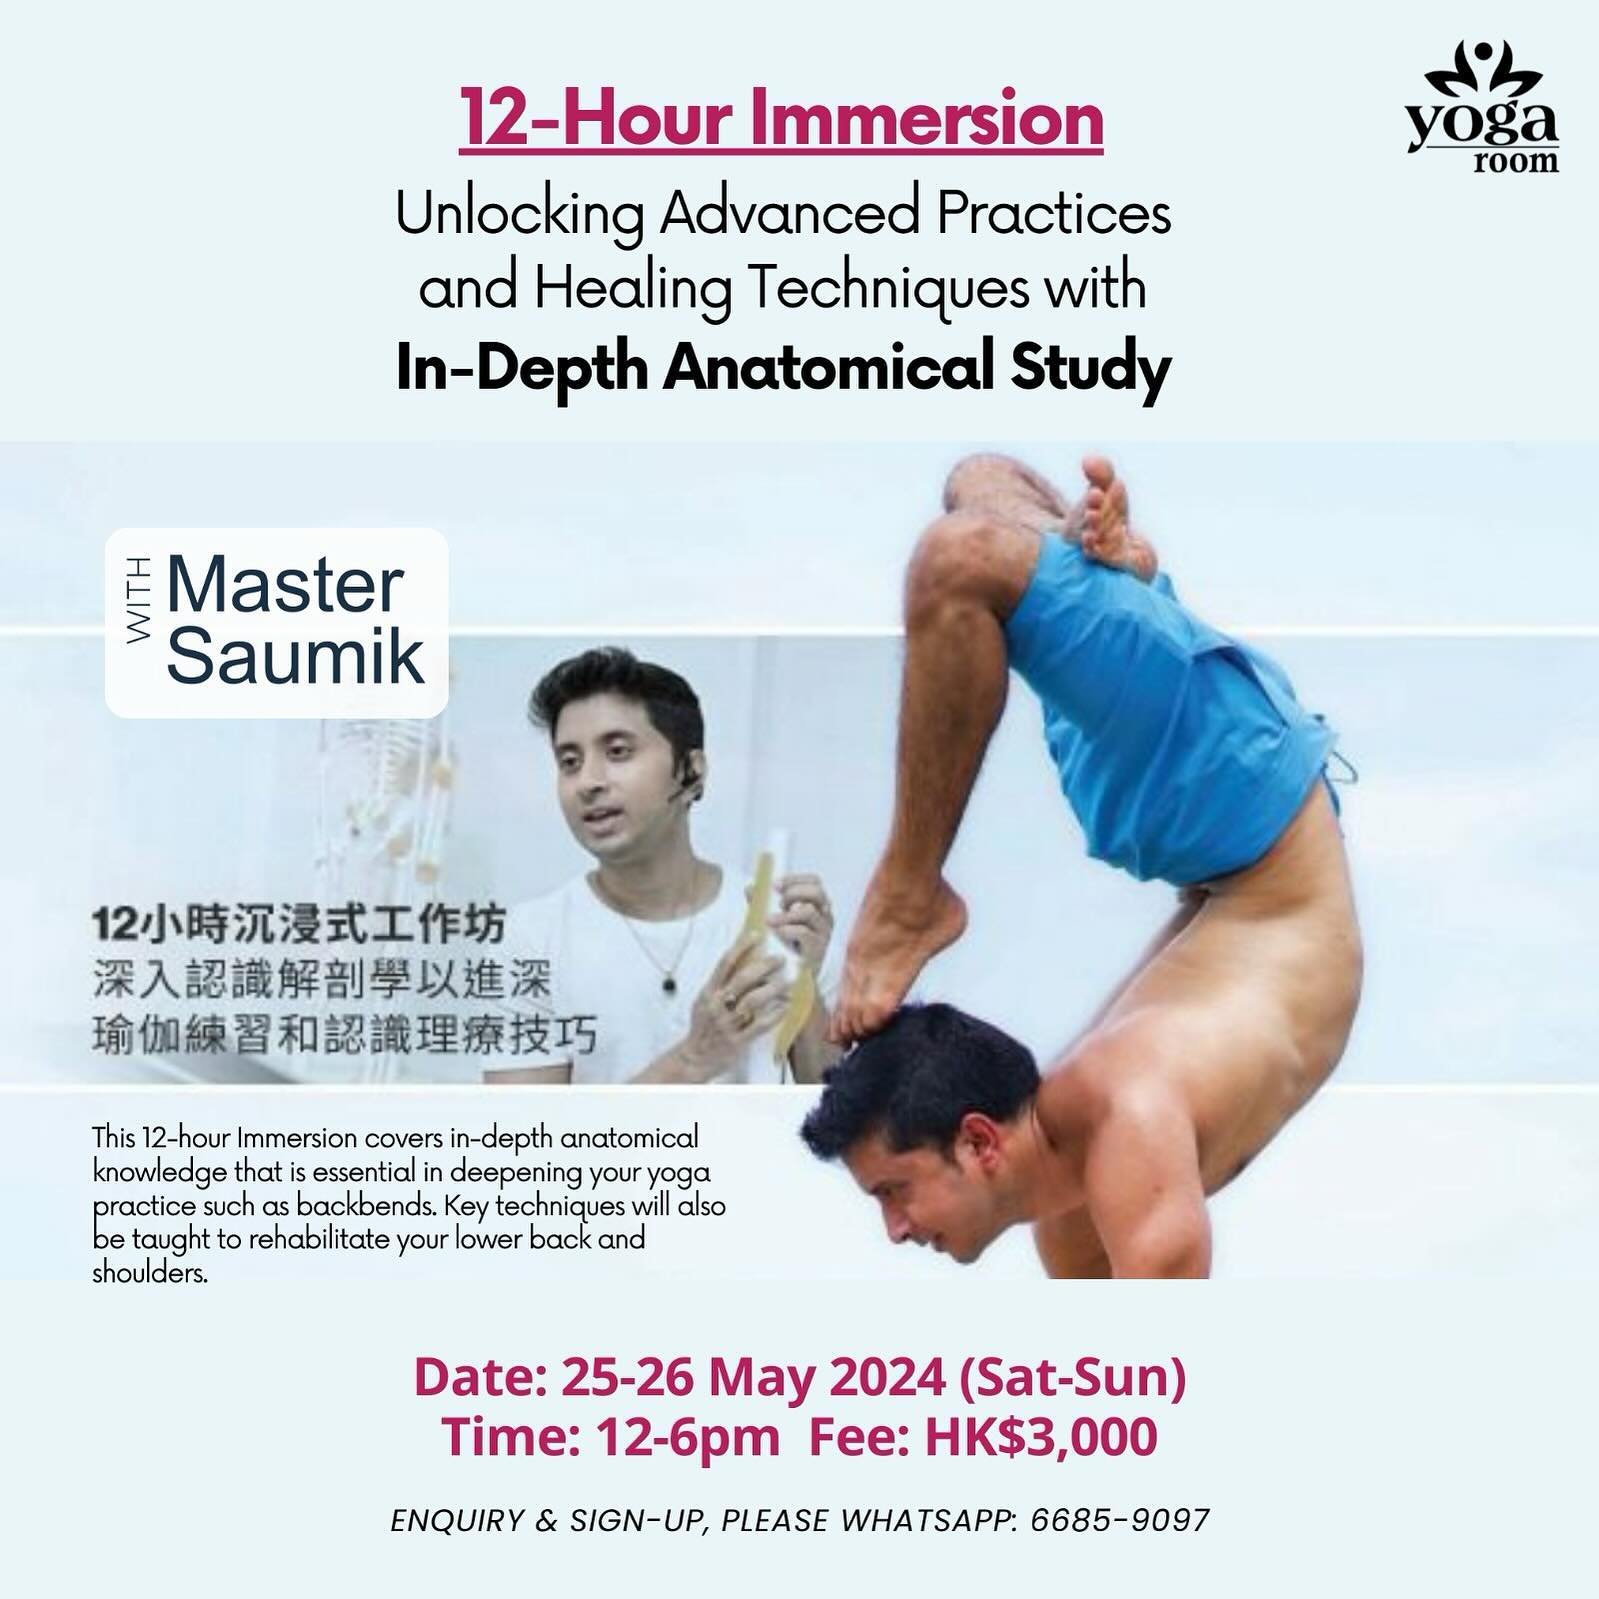 ✨12-hour Immersion &ndash; Unlocking Advanced Practices and Healing Techniques Workshop by Master Saumik✨

This workshop covers in-depth anatomical knowledge that is essential in deepening your yoga practice such as backbends. Key techniques will als